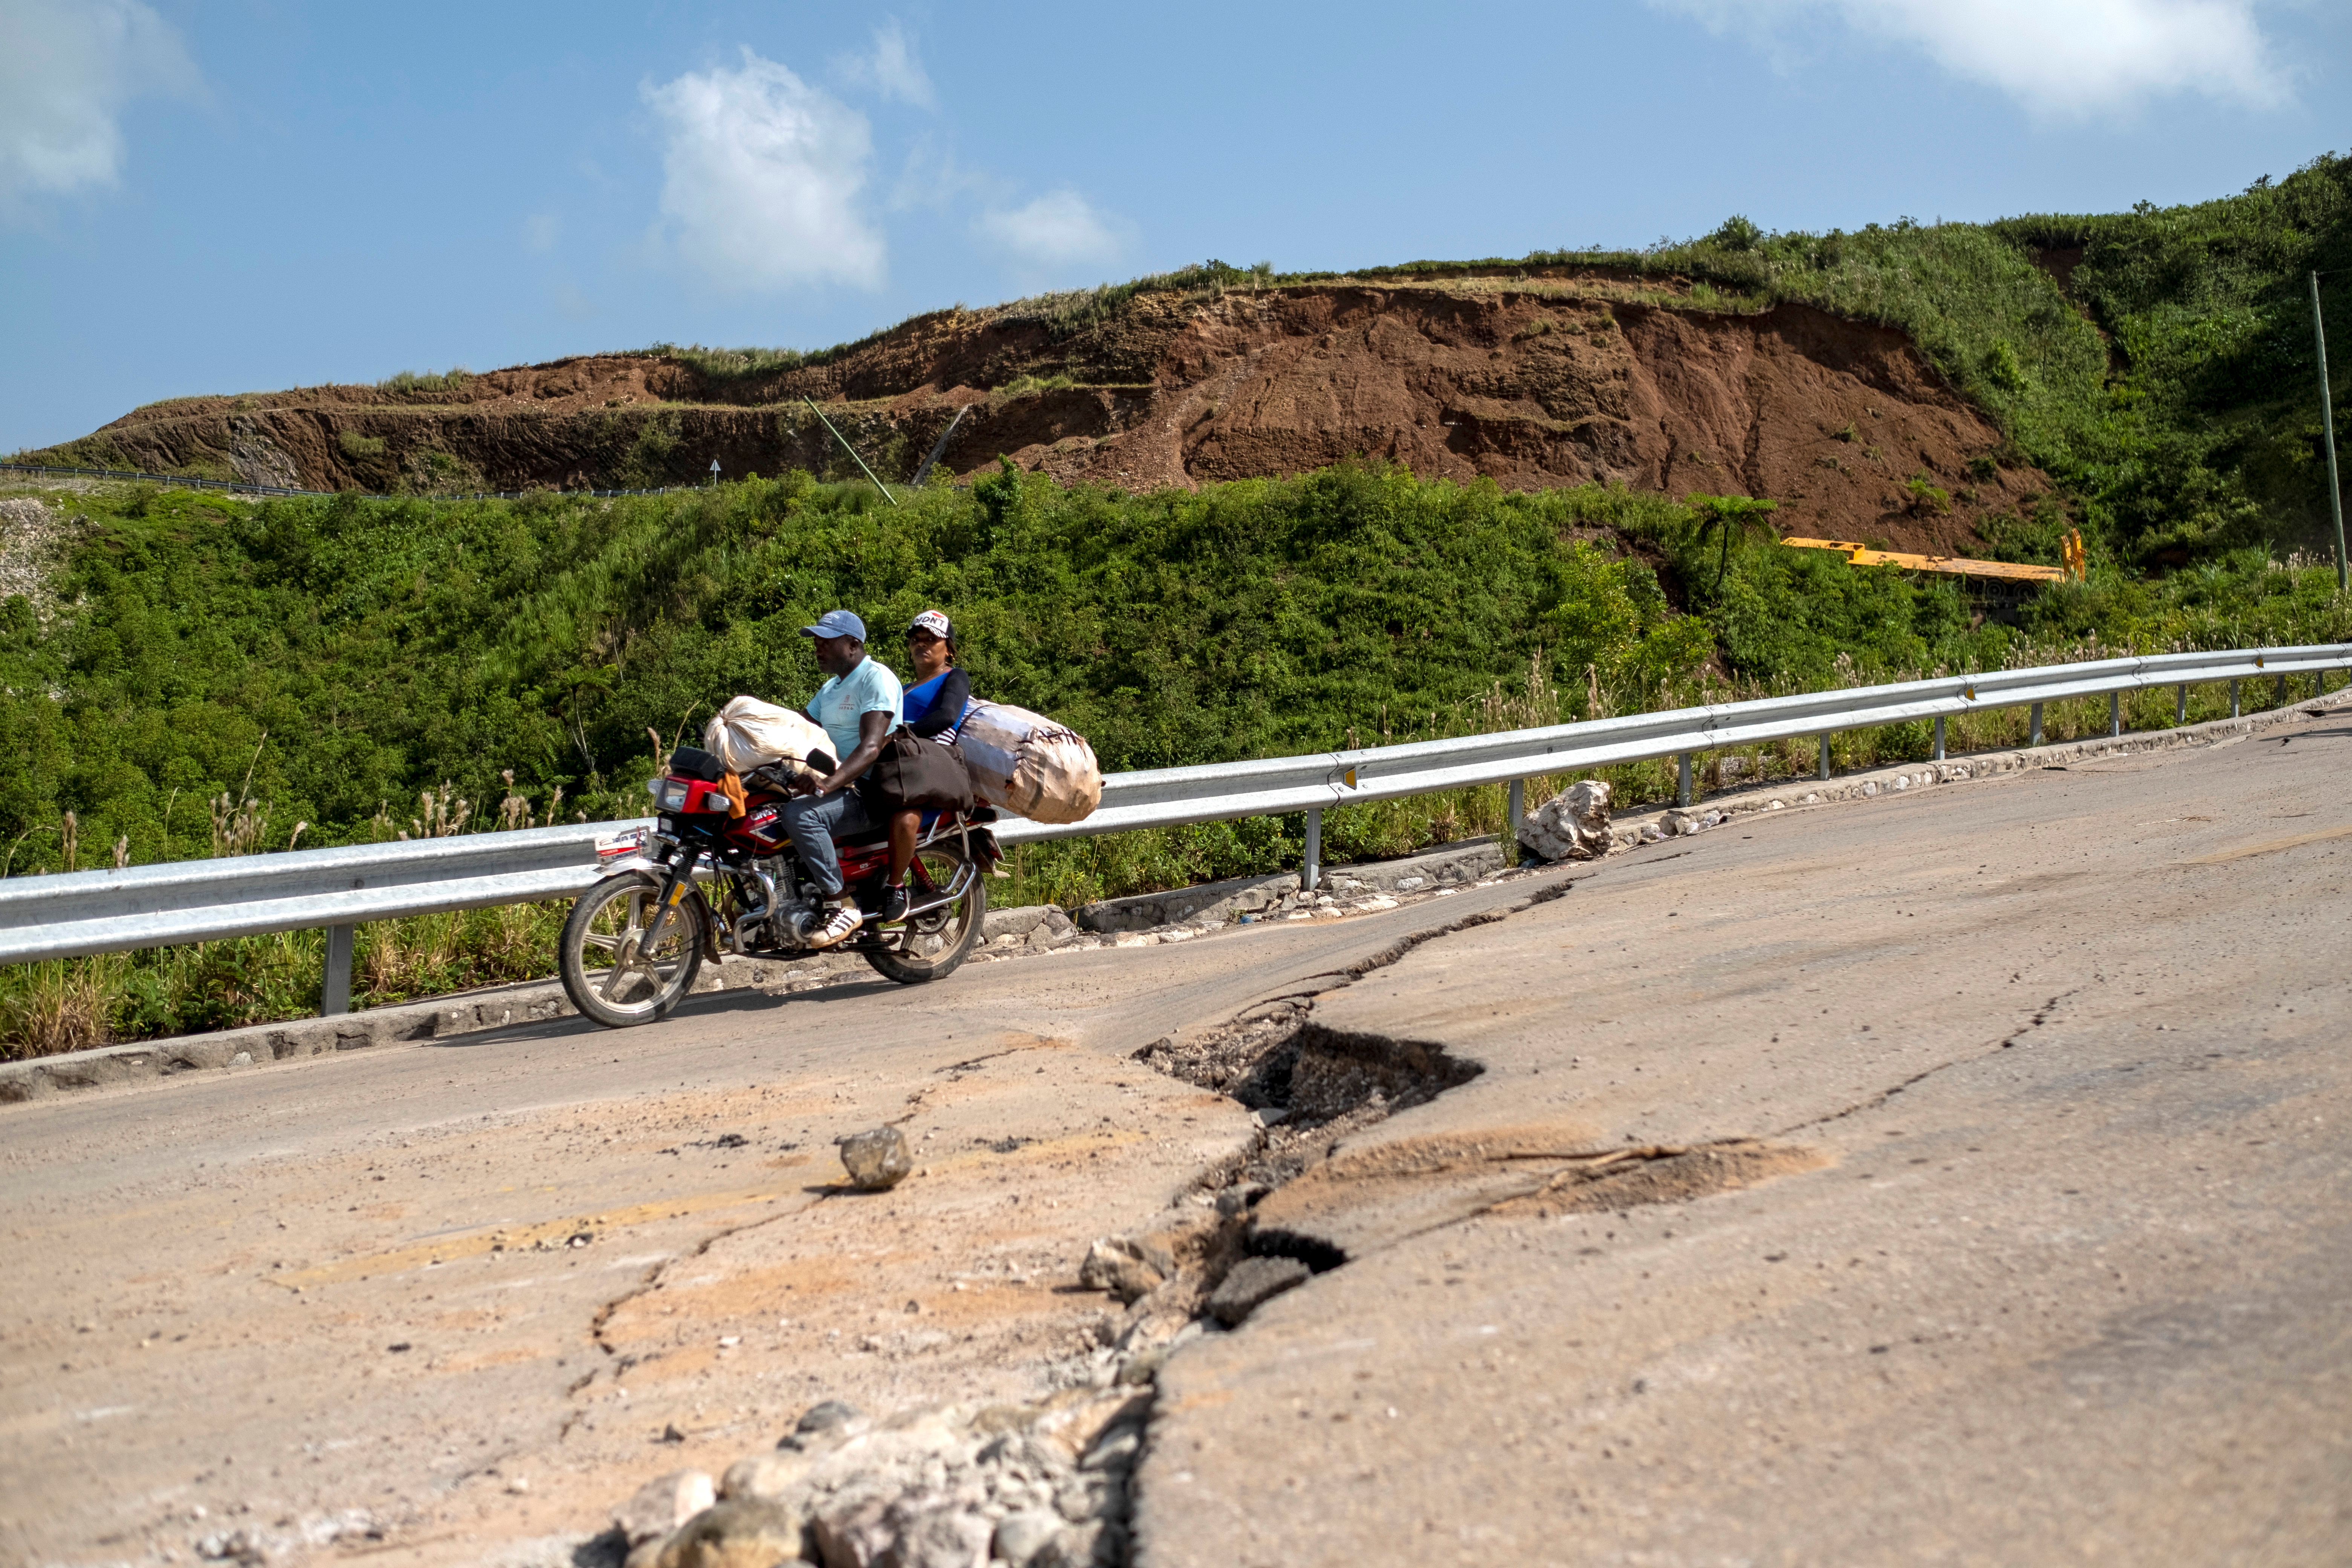 A motorcycle drives on a road with cracks caused by a 7.2 magnitude quake in Marceline, Haiti August 22, 2021. REUTERS/Ricardo Arduengo